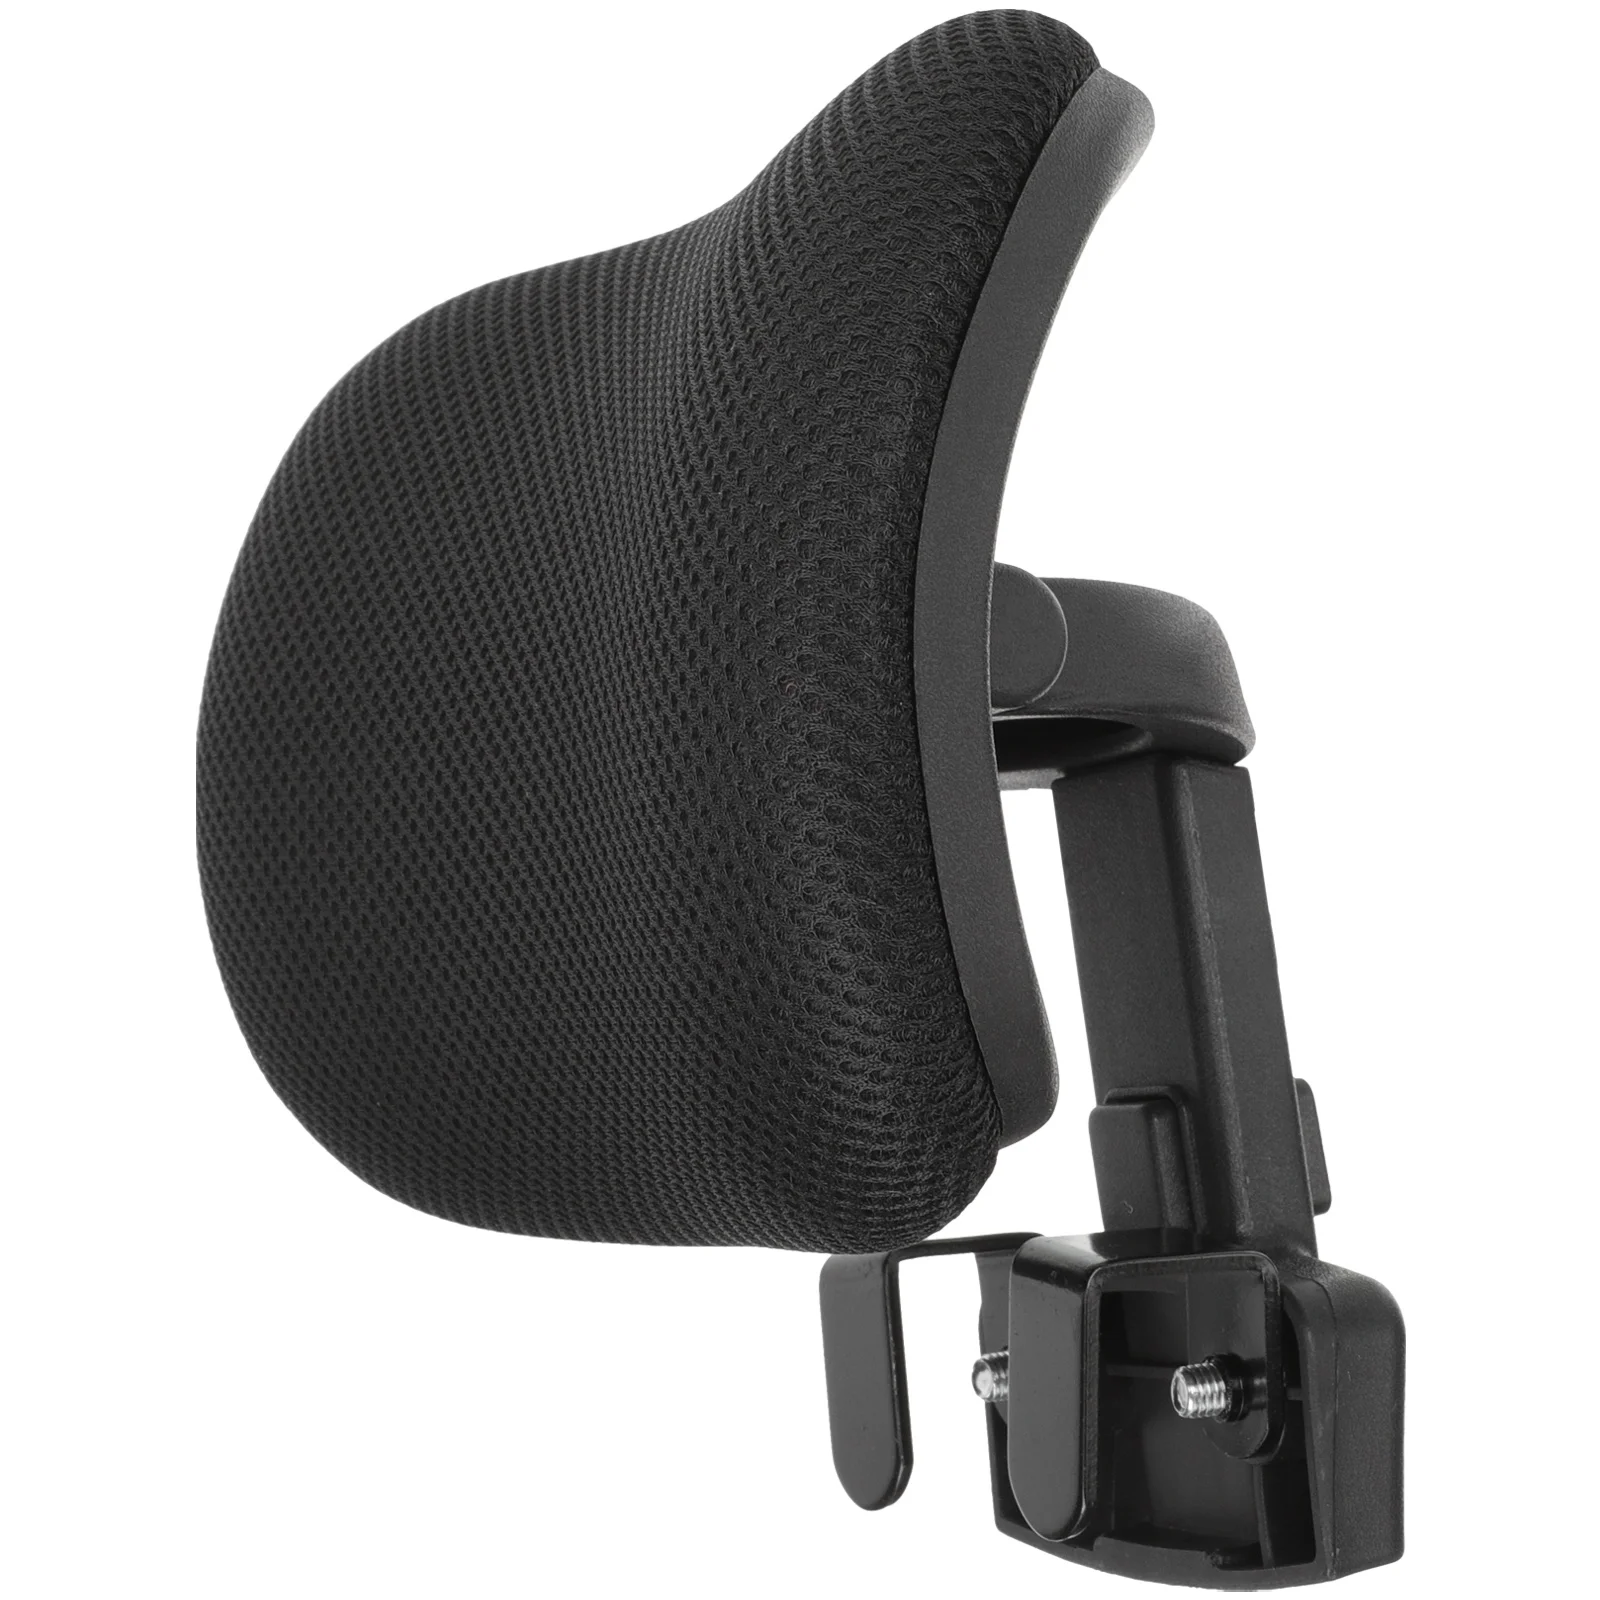 

Neck Protection Headrest Retrofit Chair Cushion Travel Pillows Lift Headrests Adjustable Computer Tables Chairs